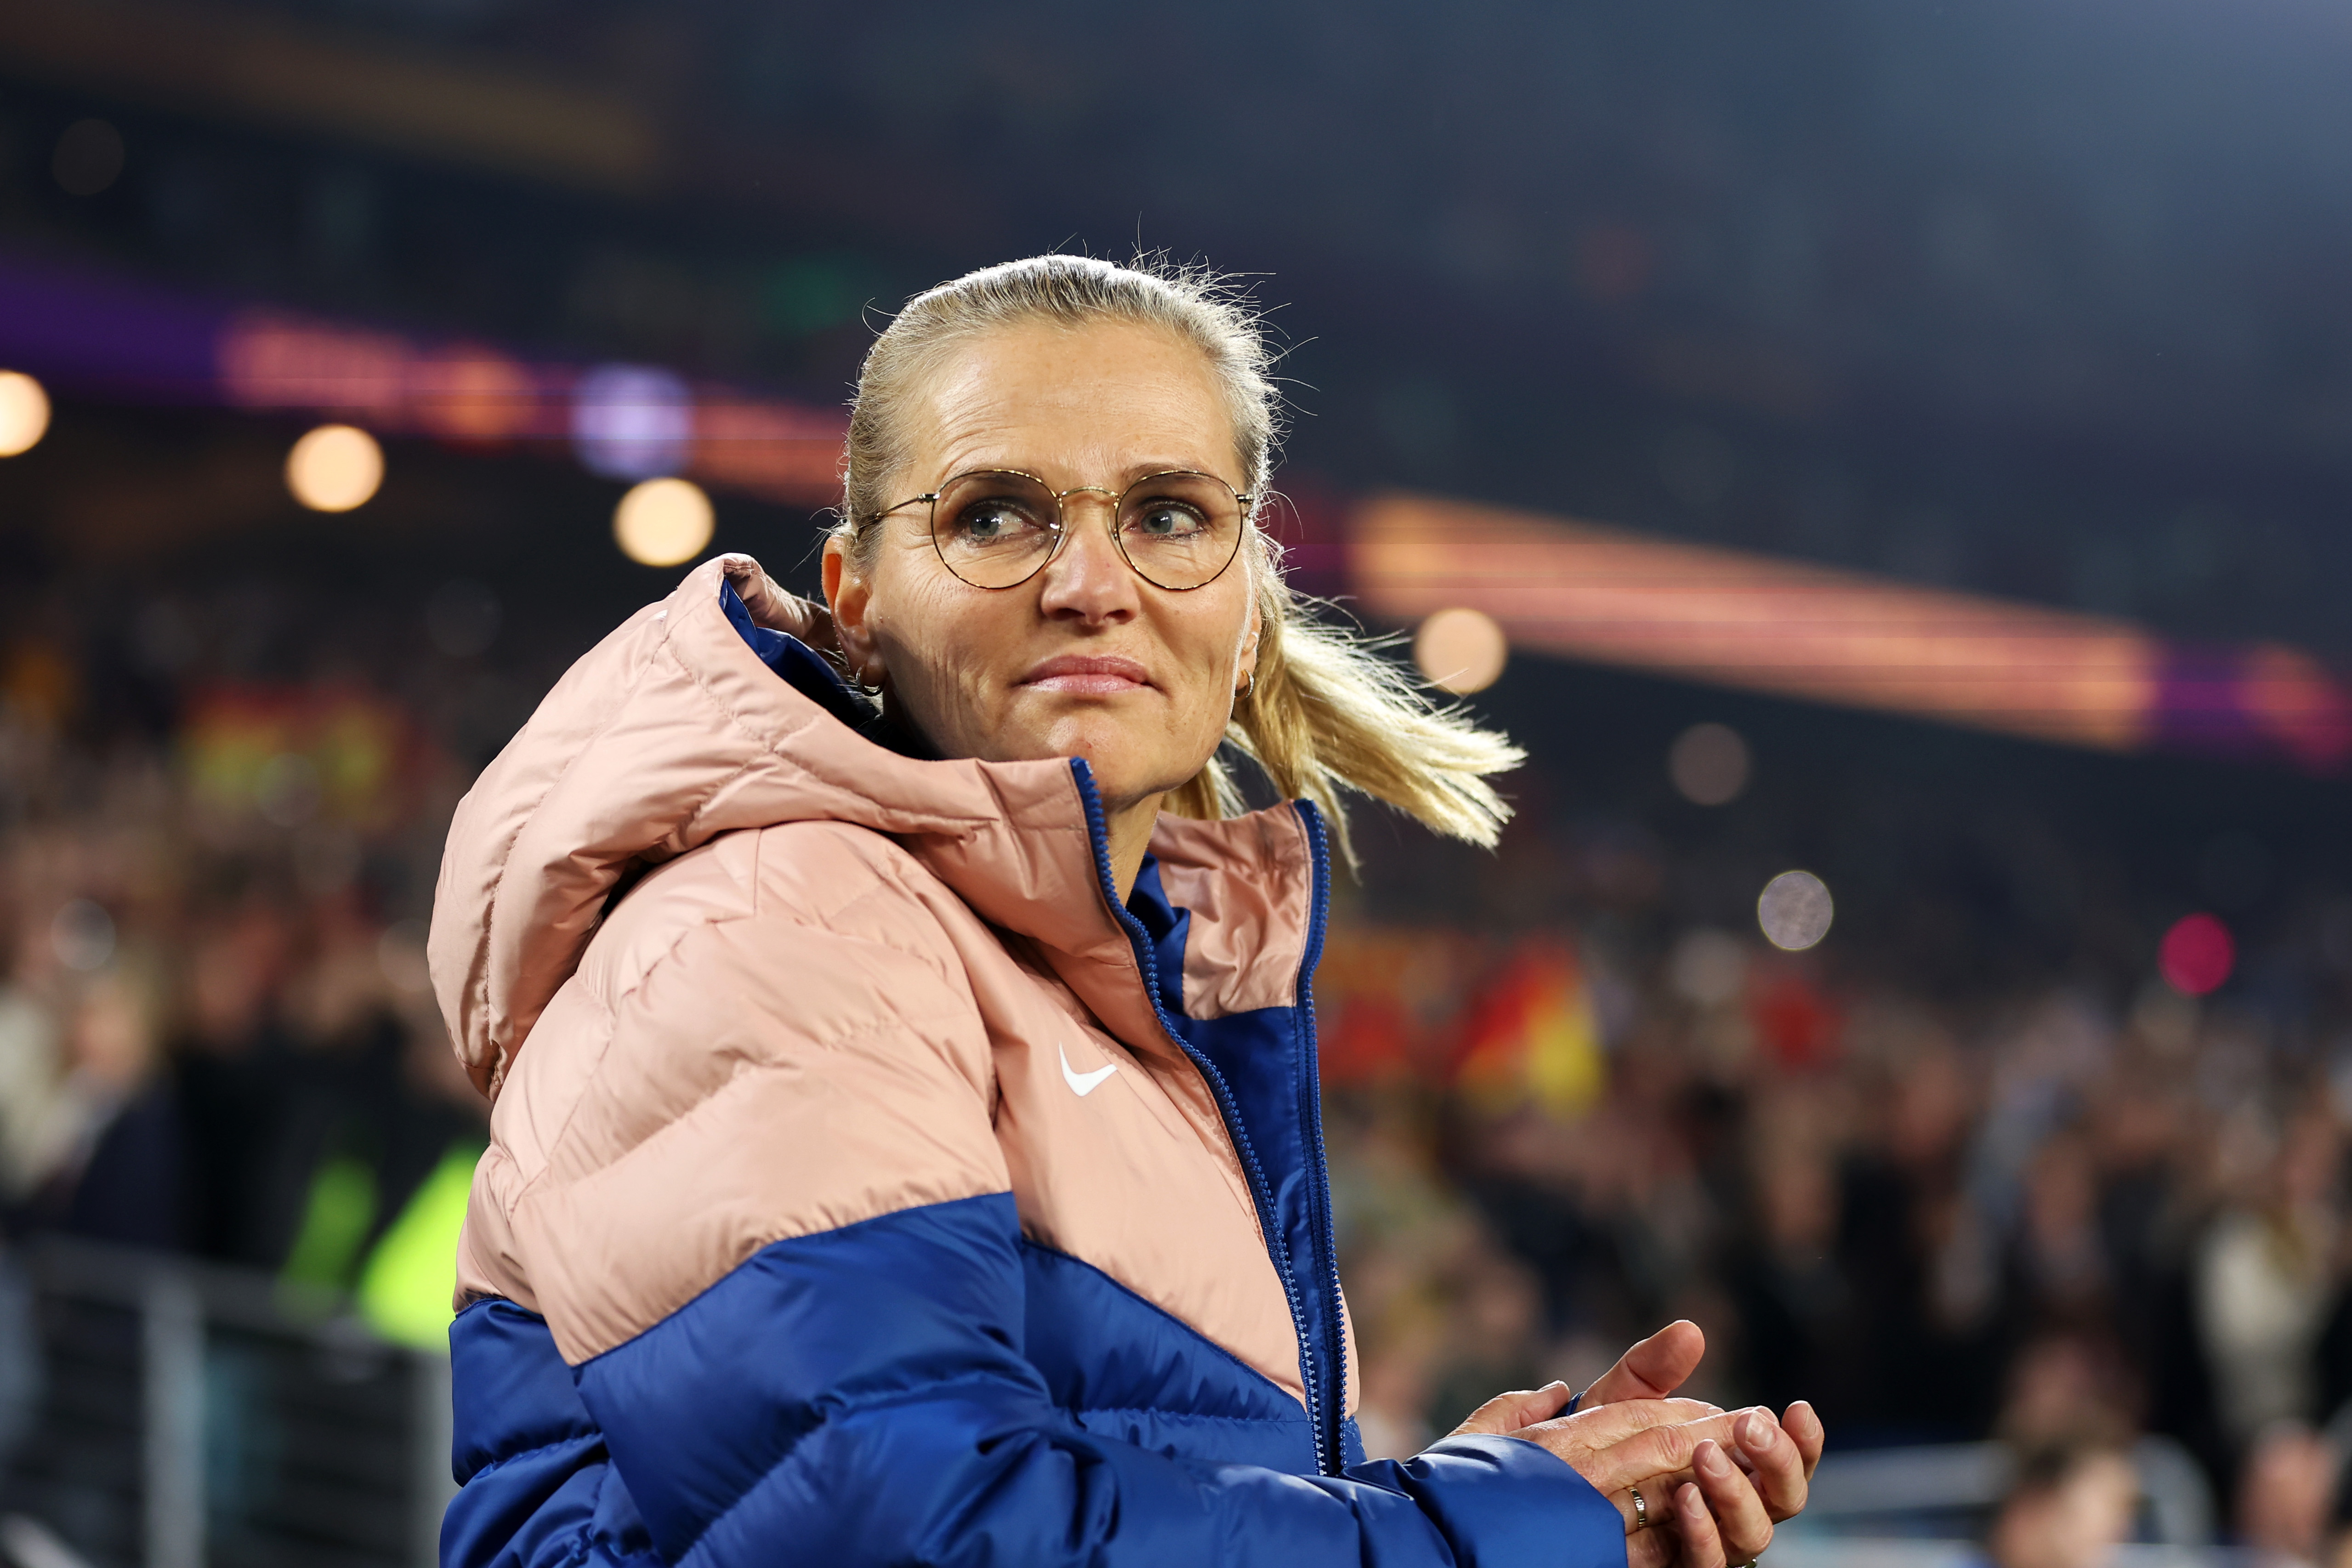 Sarina Wiegman, the manager of England's team, looks on during the final.